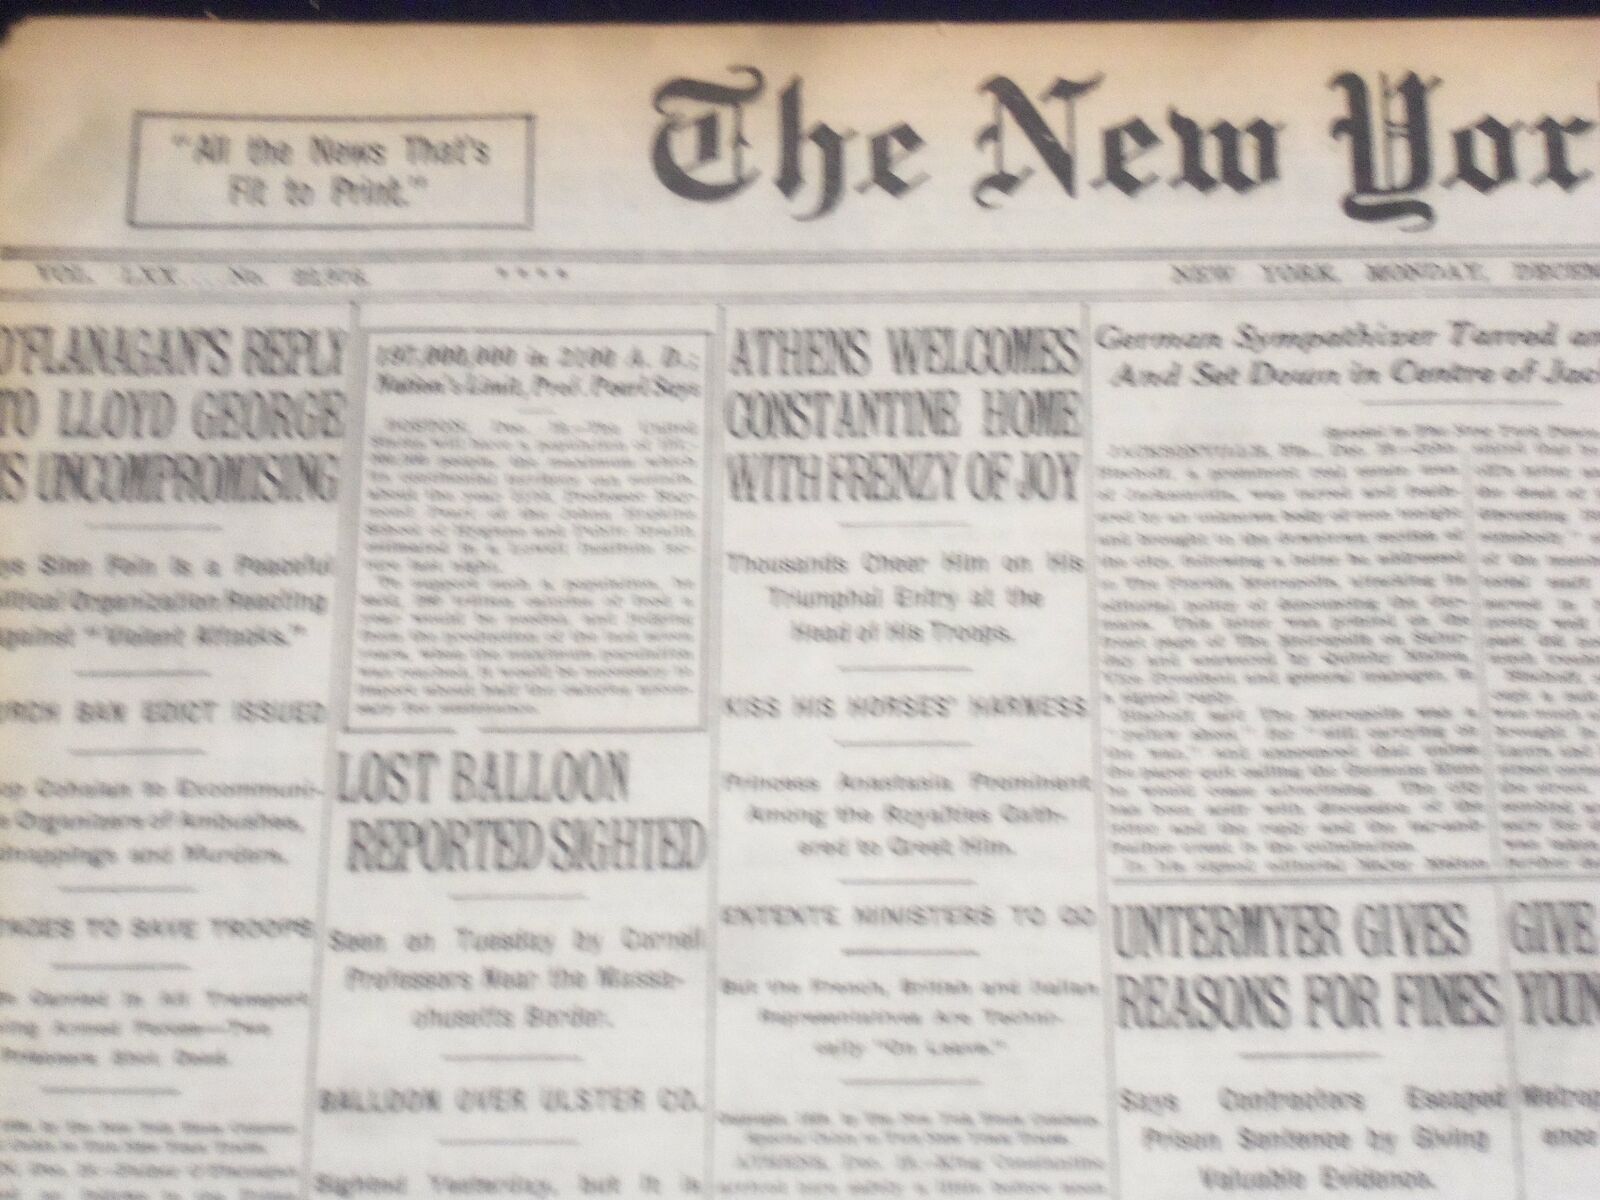 1920 DECEMBER 20 NEW YORK TIMES - ATHENS WELCOMES CONSTANTINE HOME - NT 8498